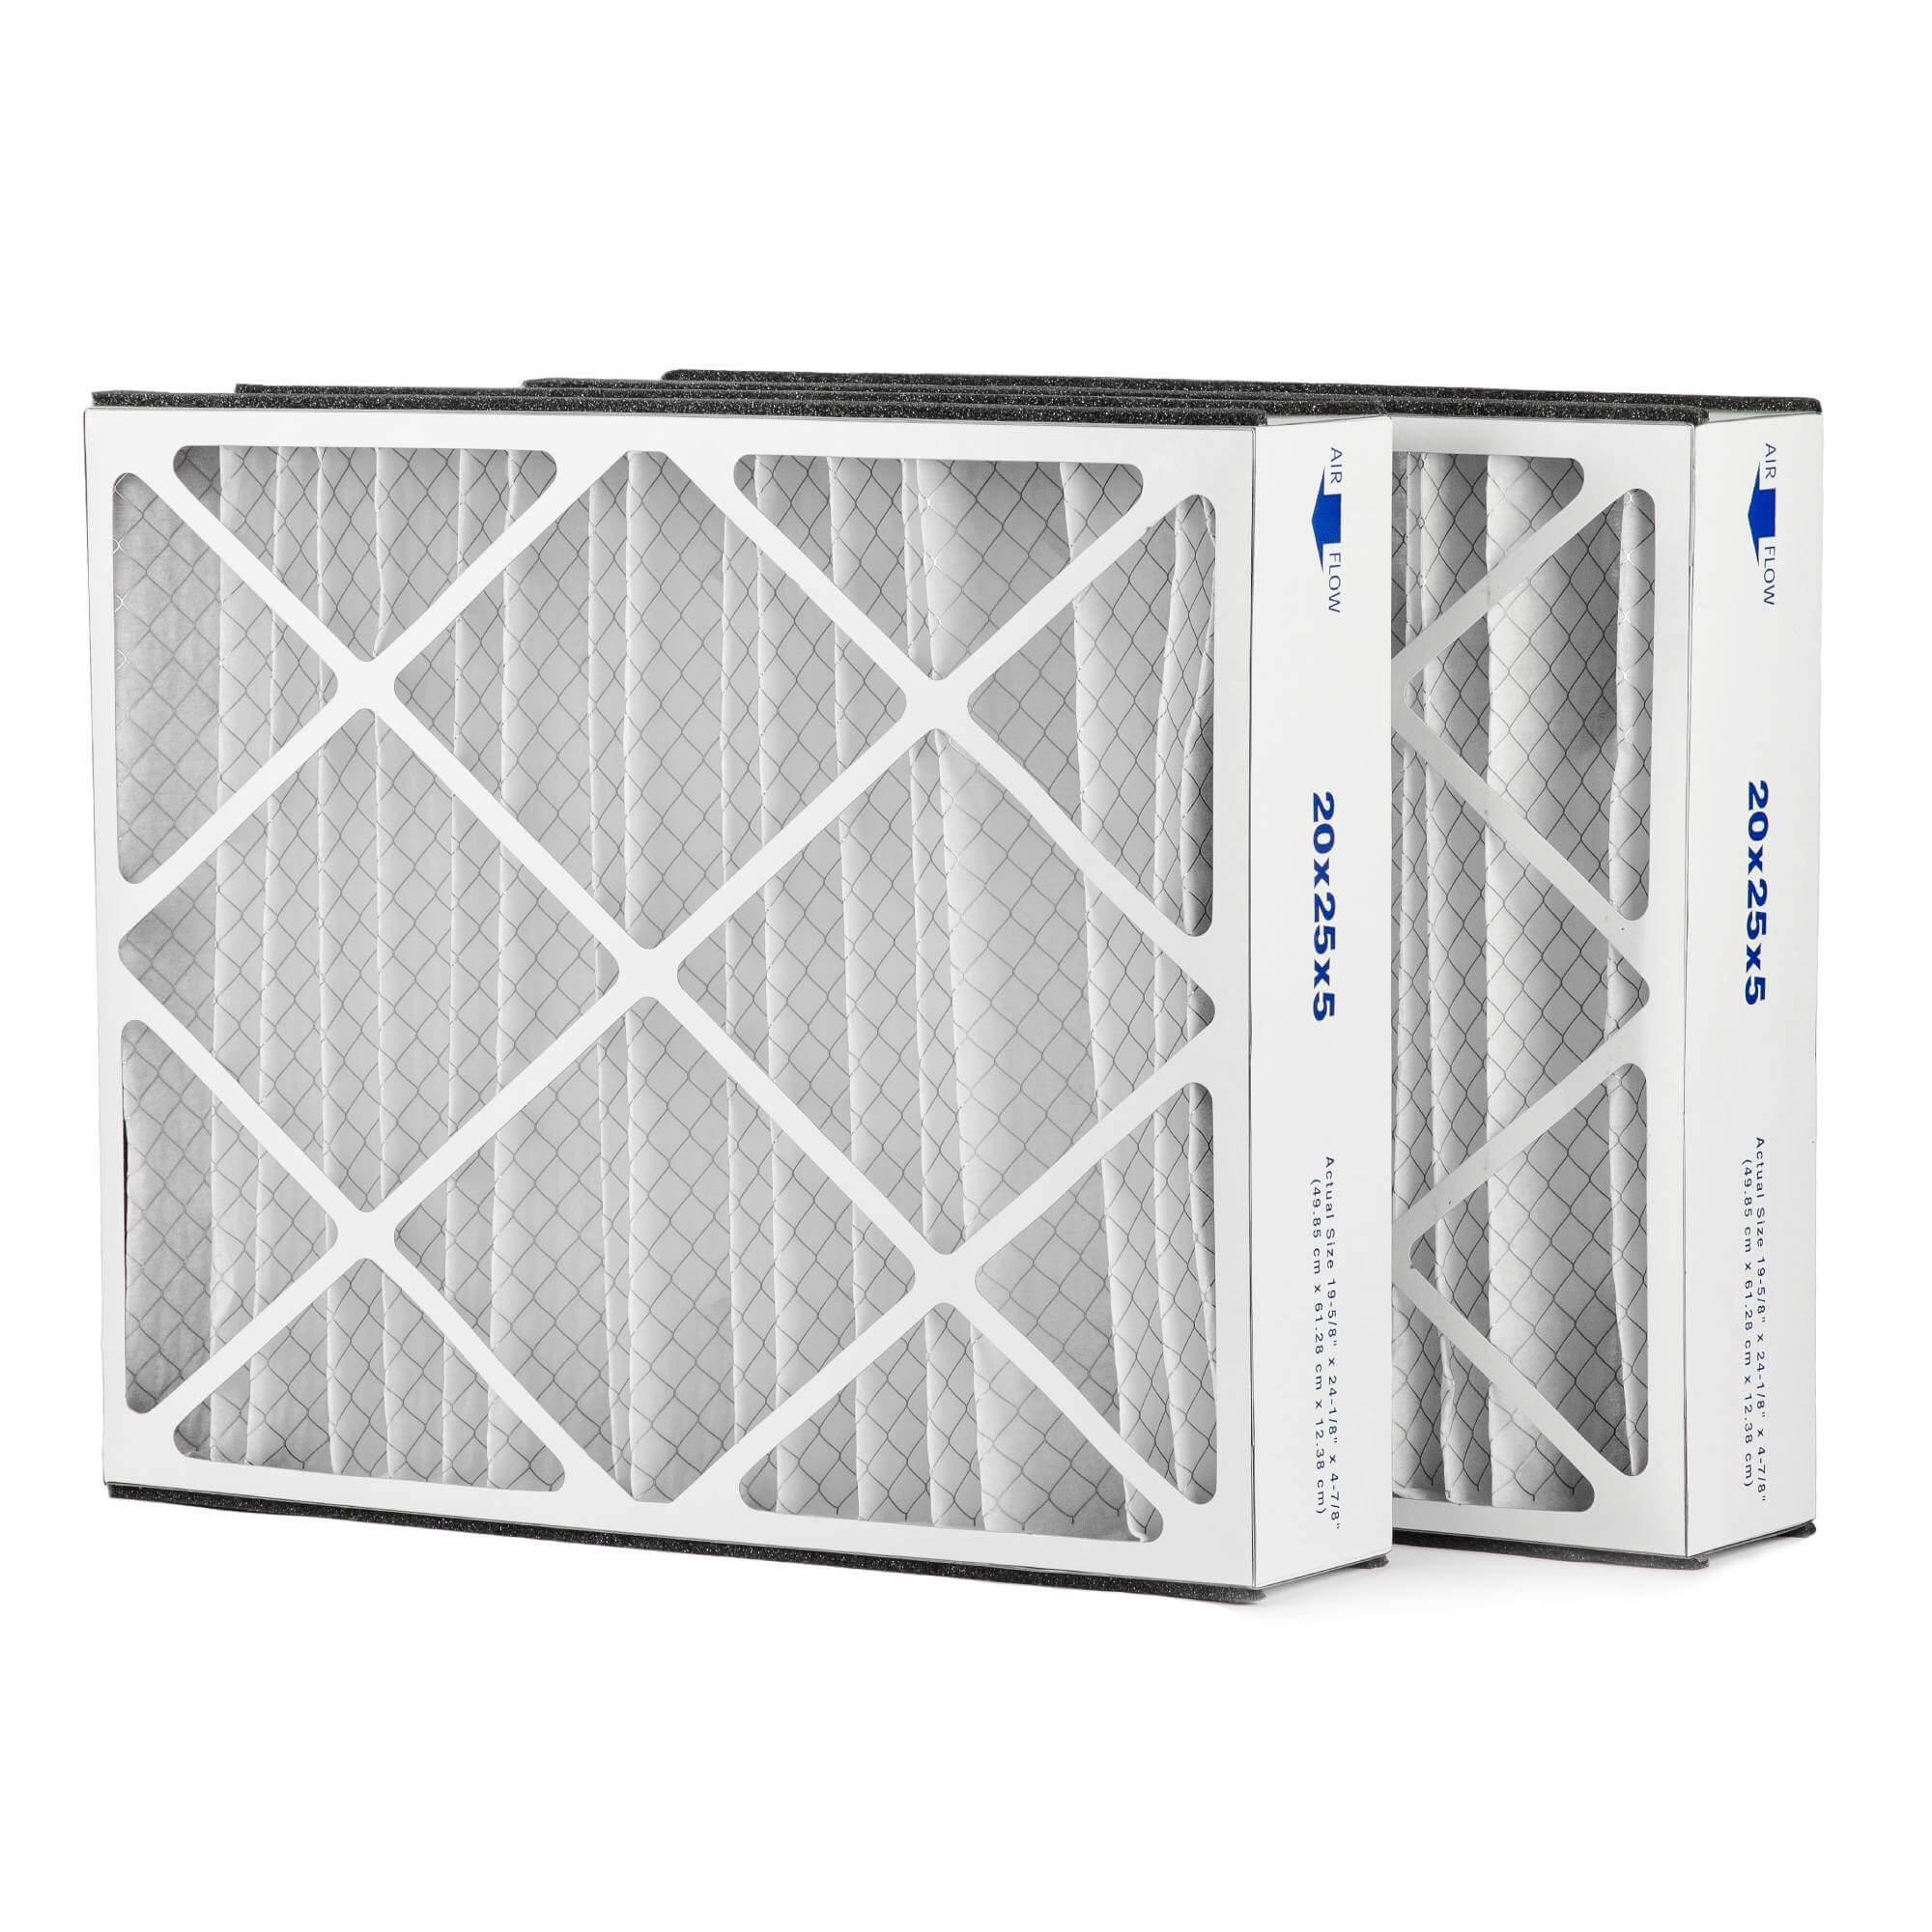 255649-102 Filters Fast® Replacement for Trion Air Bear 255649-102 20x25x5 MERV 8 Furnace & AC Air Filter - 2-Pack